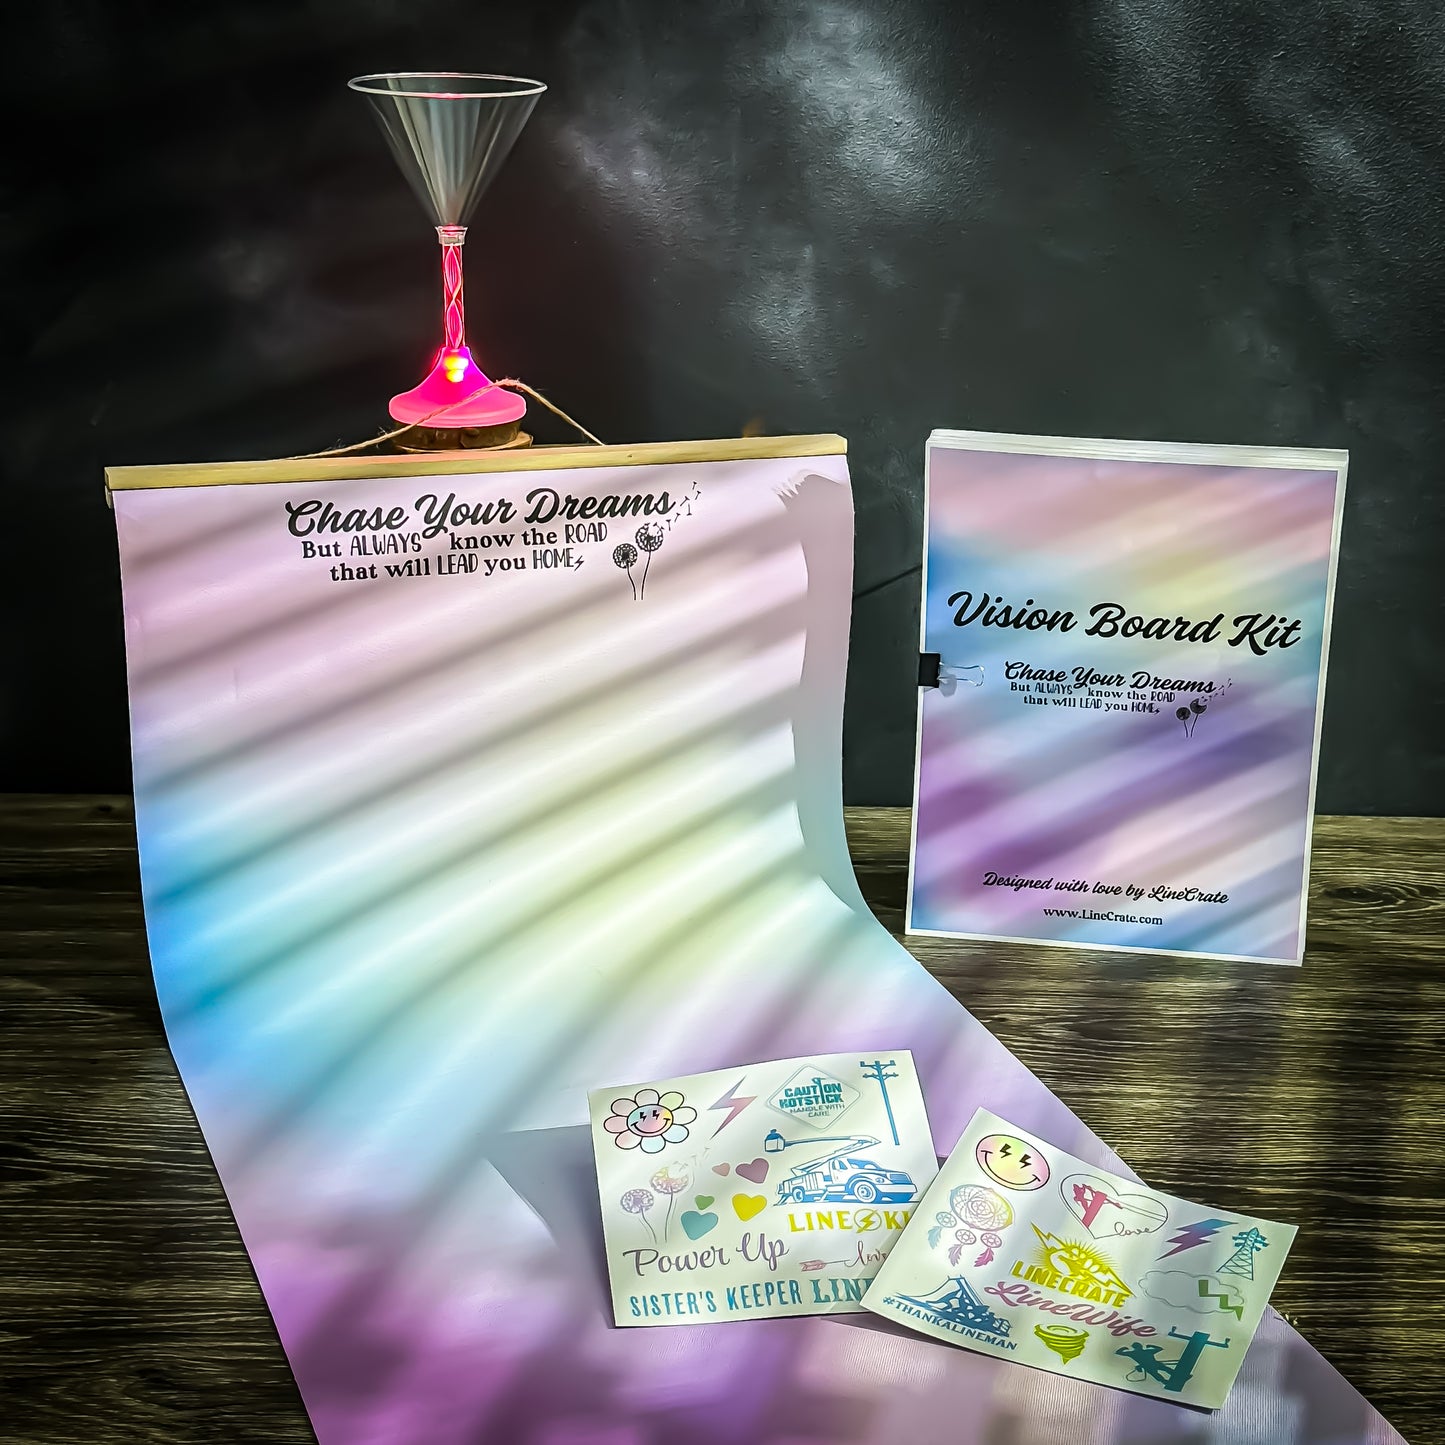 Relax & Manifest Your Dreams - Vision Board Kit-  LineBabe Light-Up Cocktail Glass, Vision Board Sticker Set, Digital Vision Board Kit